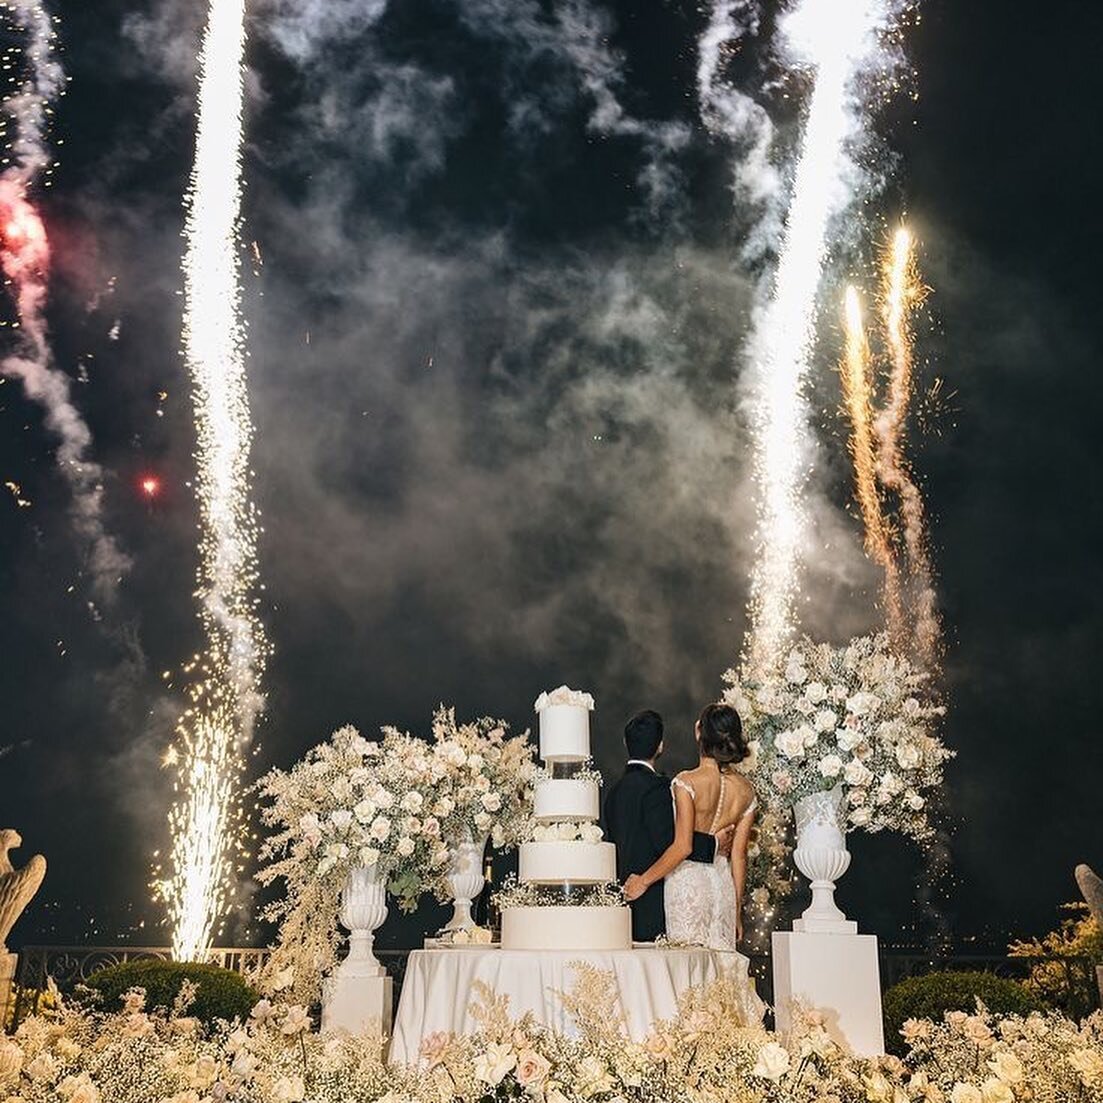 Epic moments to have for your wedding, swipe left for ideas &amp; see below for ideas :

1- epic firework show 
2- pool party after the reception 
3- guest sign records 
4- welcome drinks 
5 - to go food for guest 
6- live painter of the wedding 
7 -